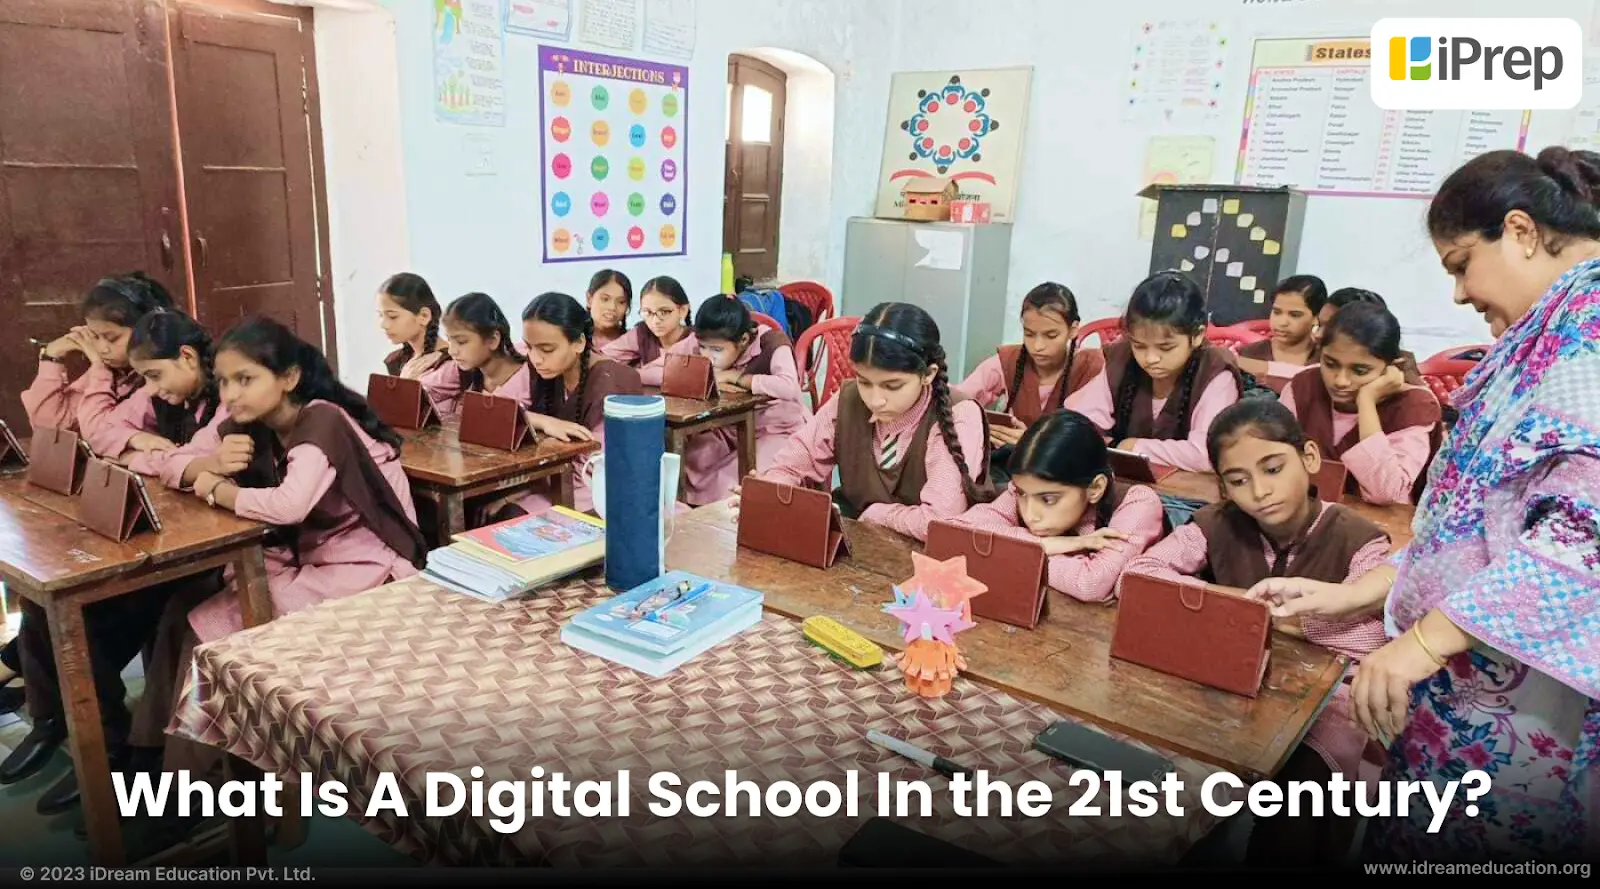 A visual representing a Digital School where Students are engaged in digital learning with a Tablet-Based Digital Library.